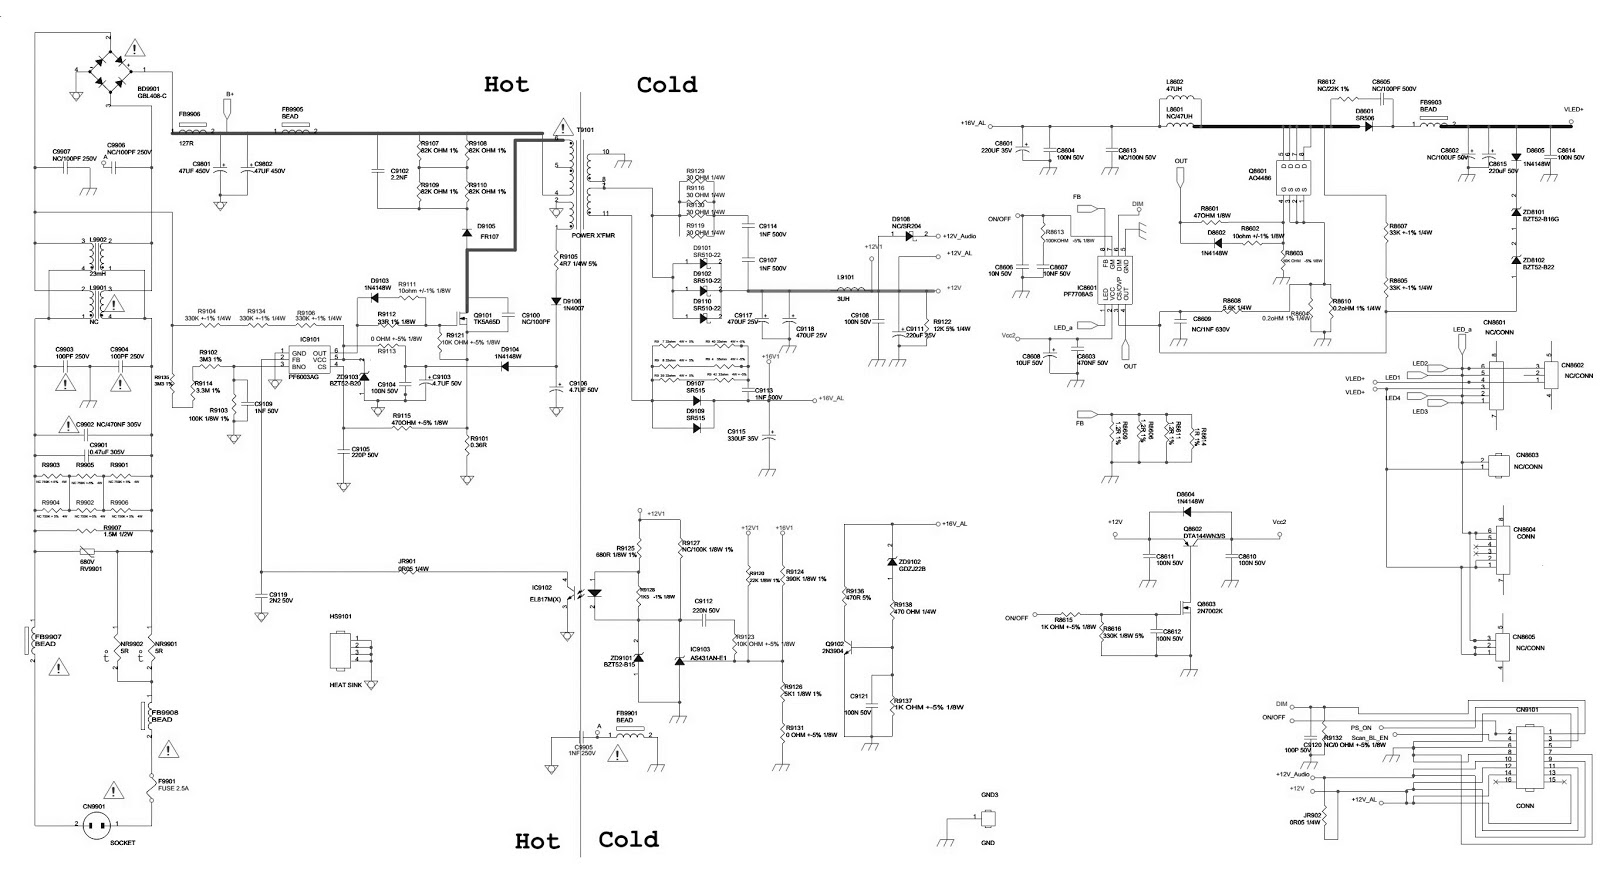 Philips LCD TV SMPS Circuit Diagrams | Electro help